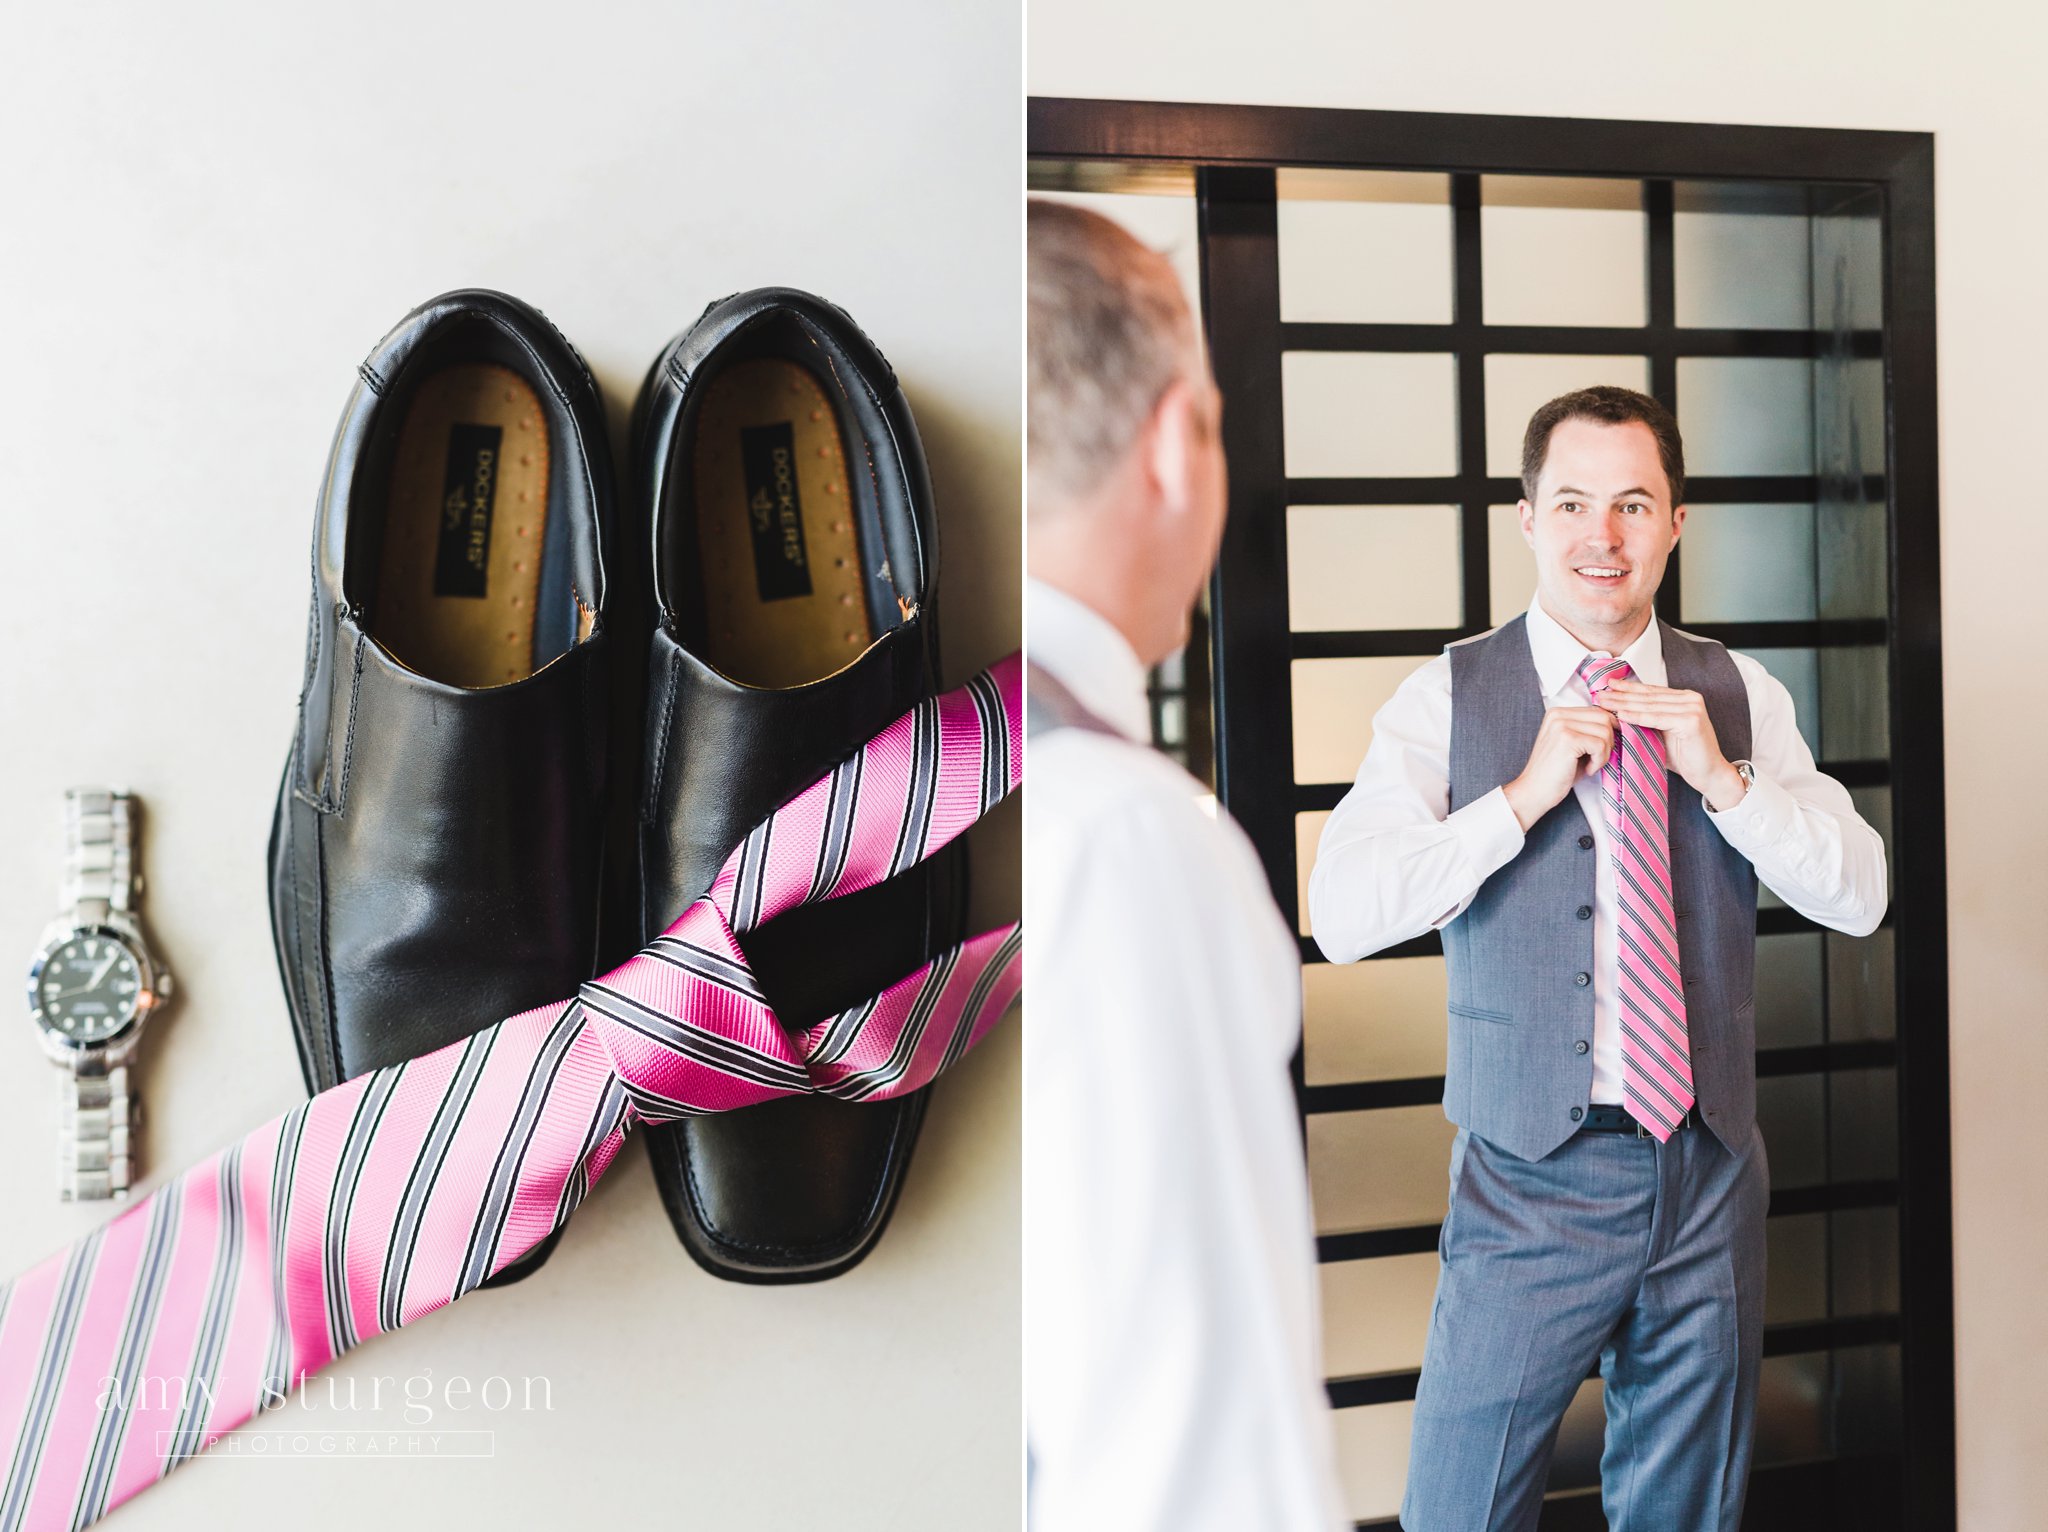 The groom wore a pink tie at the Playa del carmen Mexico destination wedding